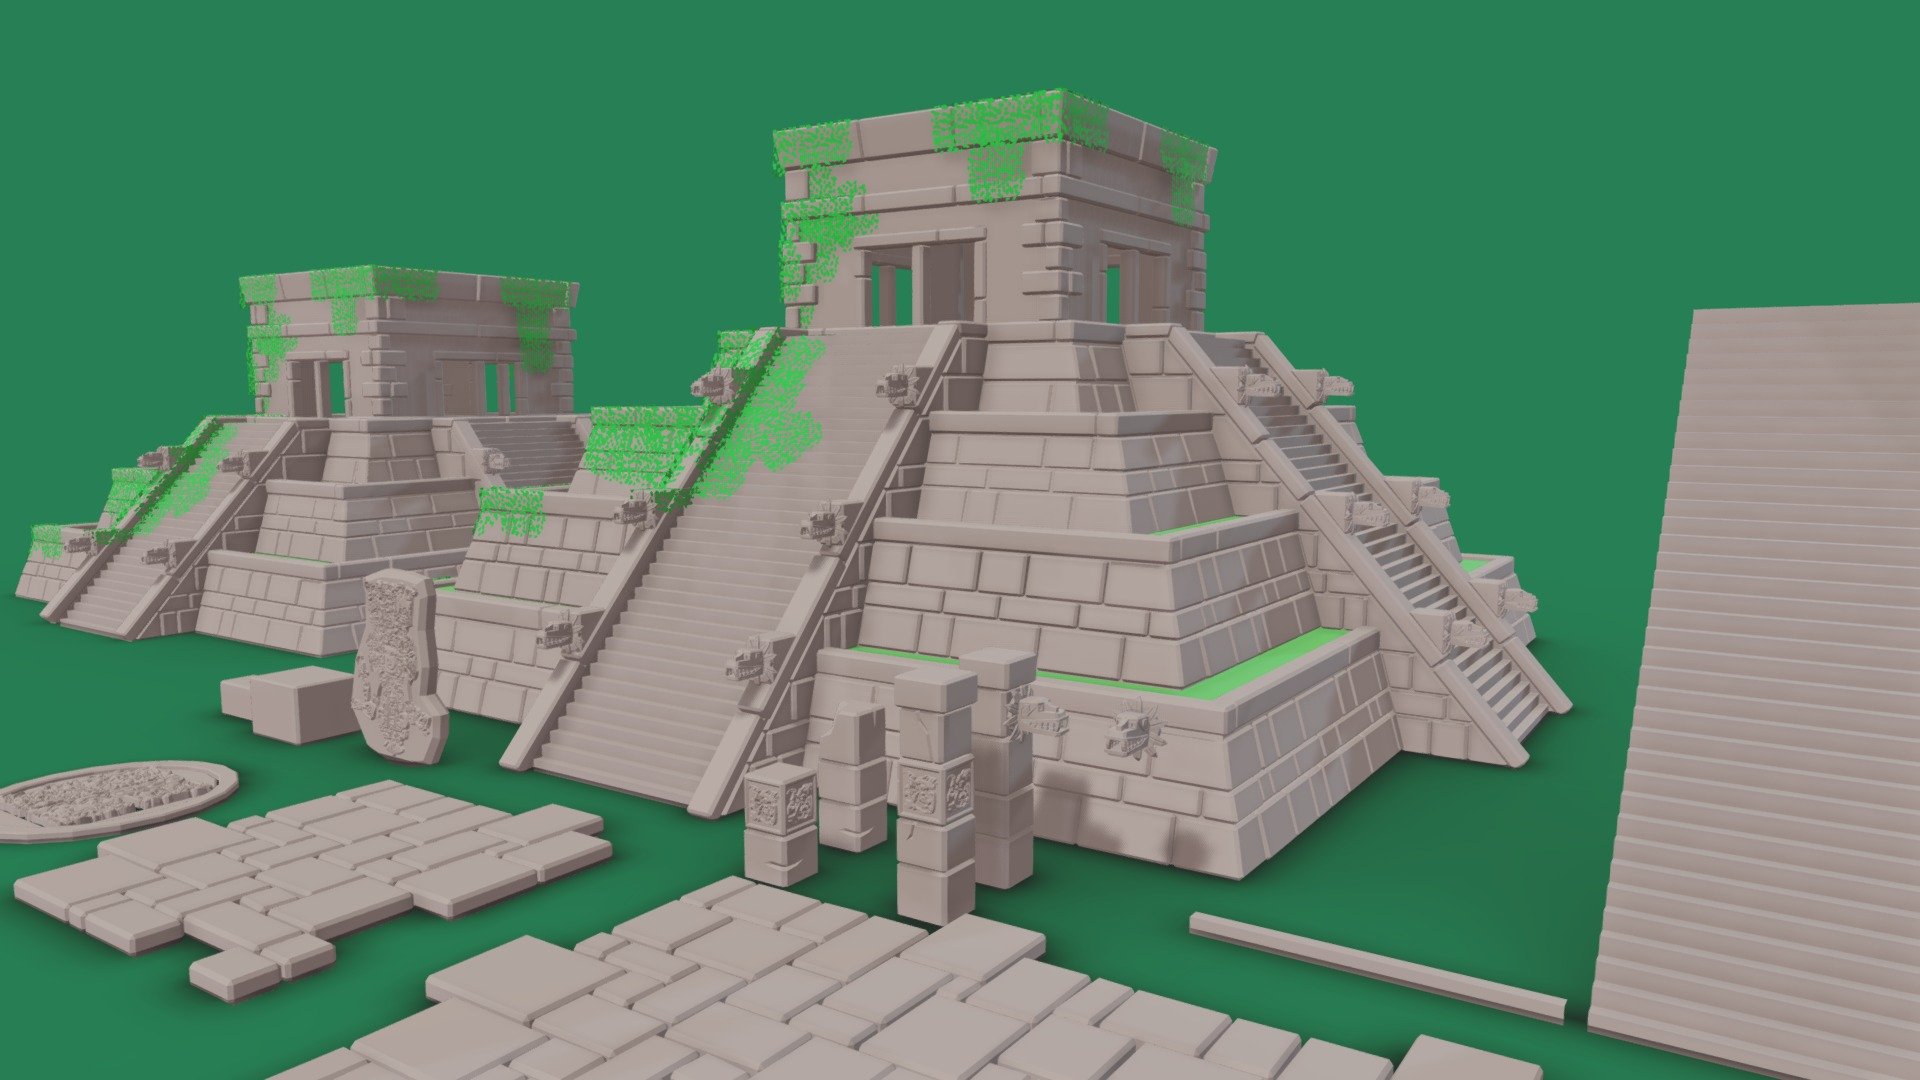 Pack of lowpoly mayan environment assets great for your games and projects

include:




Two vesions of temple

Mayan altar

Mayan stela

Columns

9-slice seamless terrace

tilable stone floor

Blender file +leaves alpha texture included - Lowpoly mayan temple and decorations - Buy Royalty Free 3D model by Apokalips123 (@semarumov) 3d model